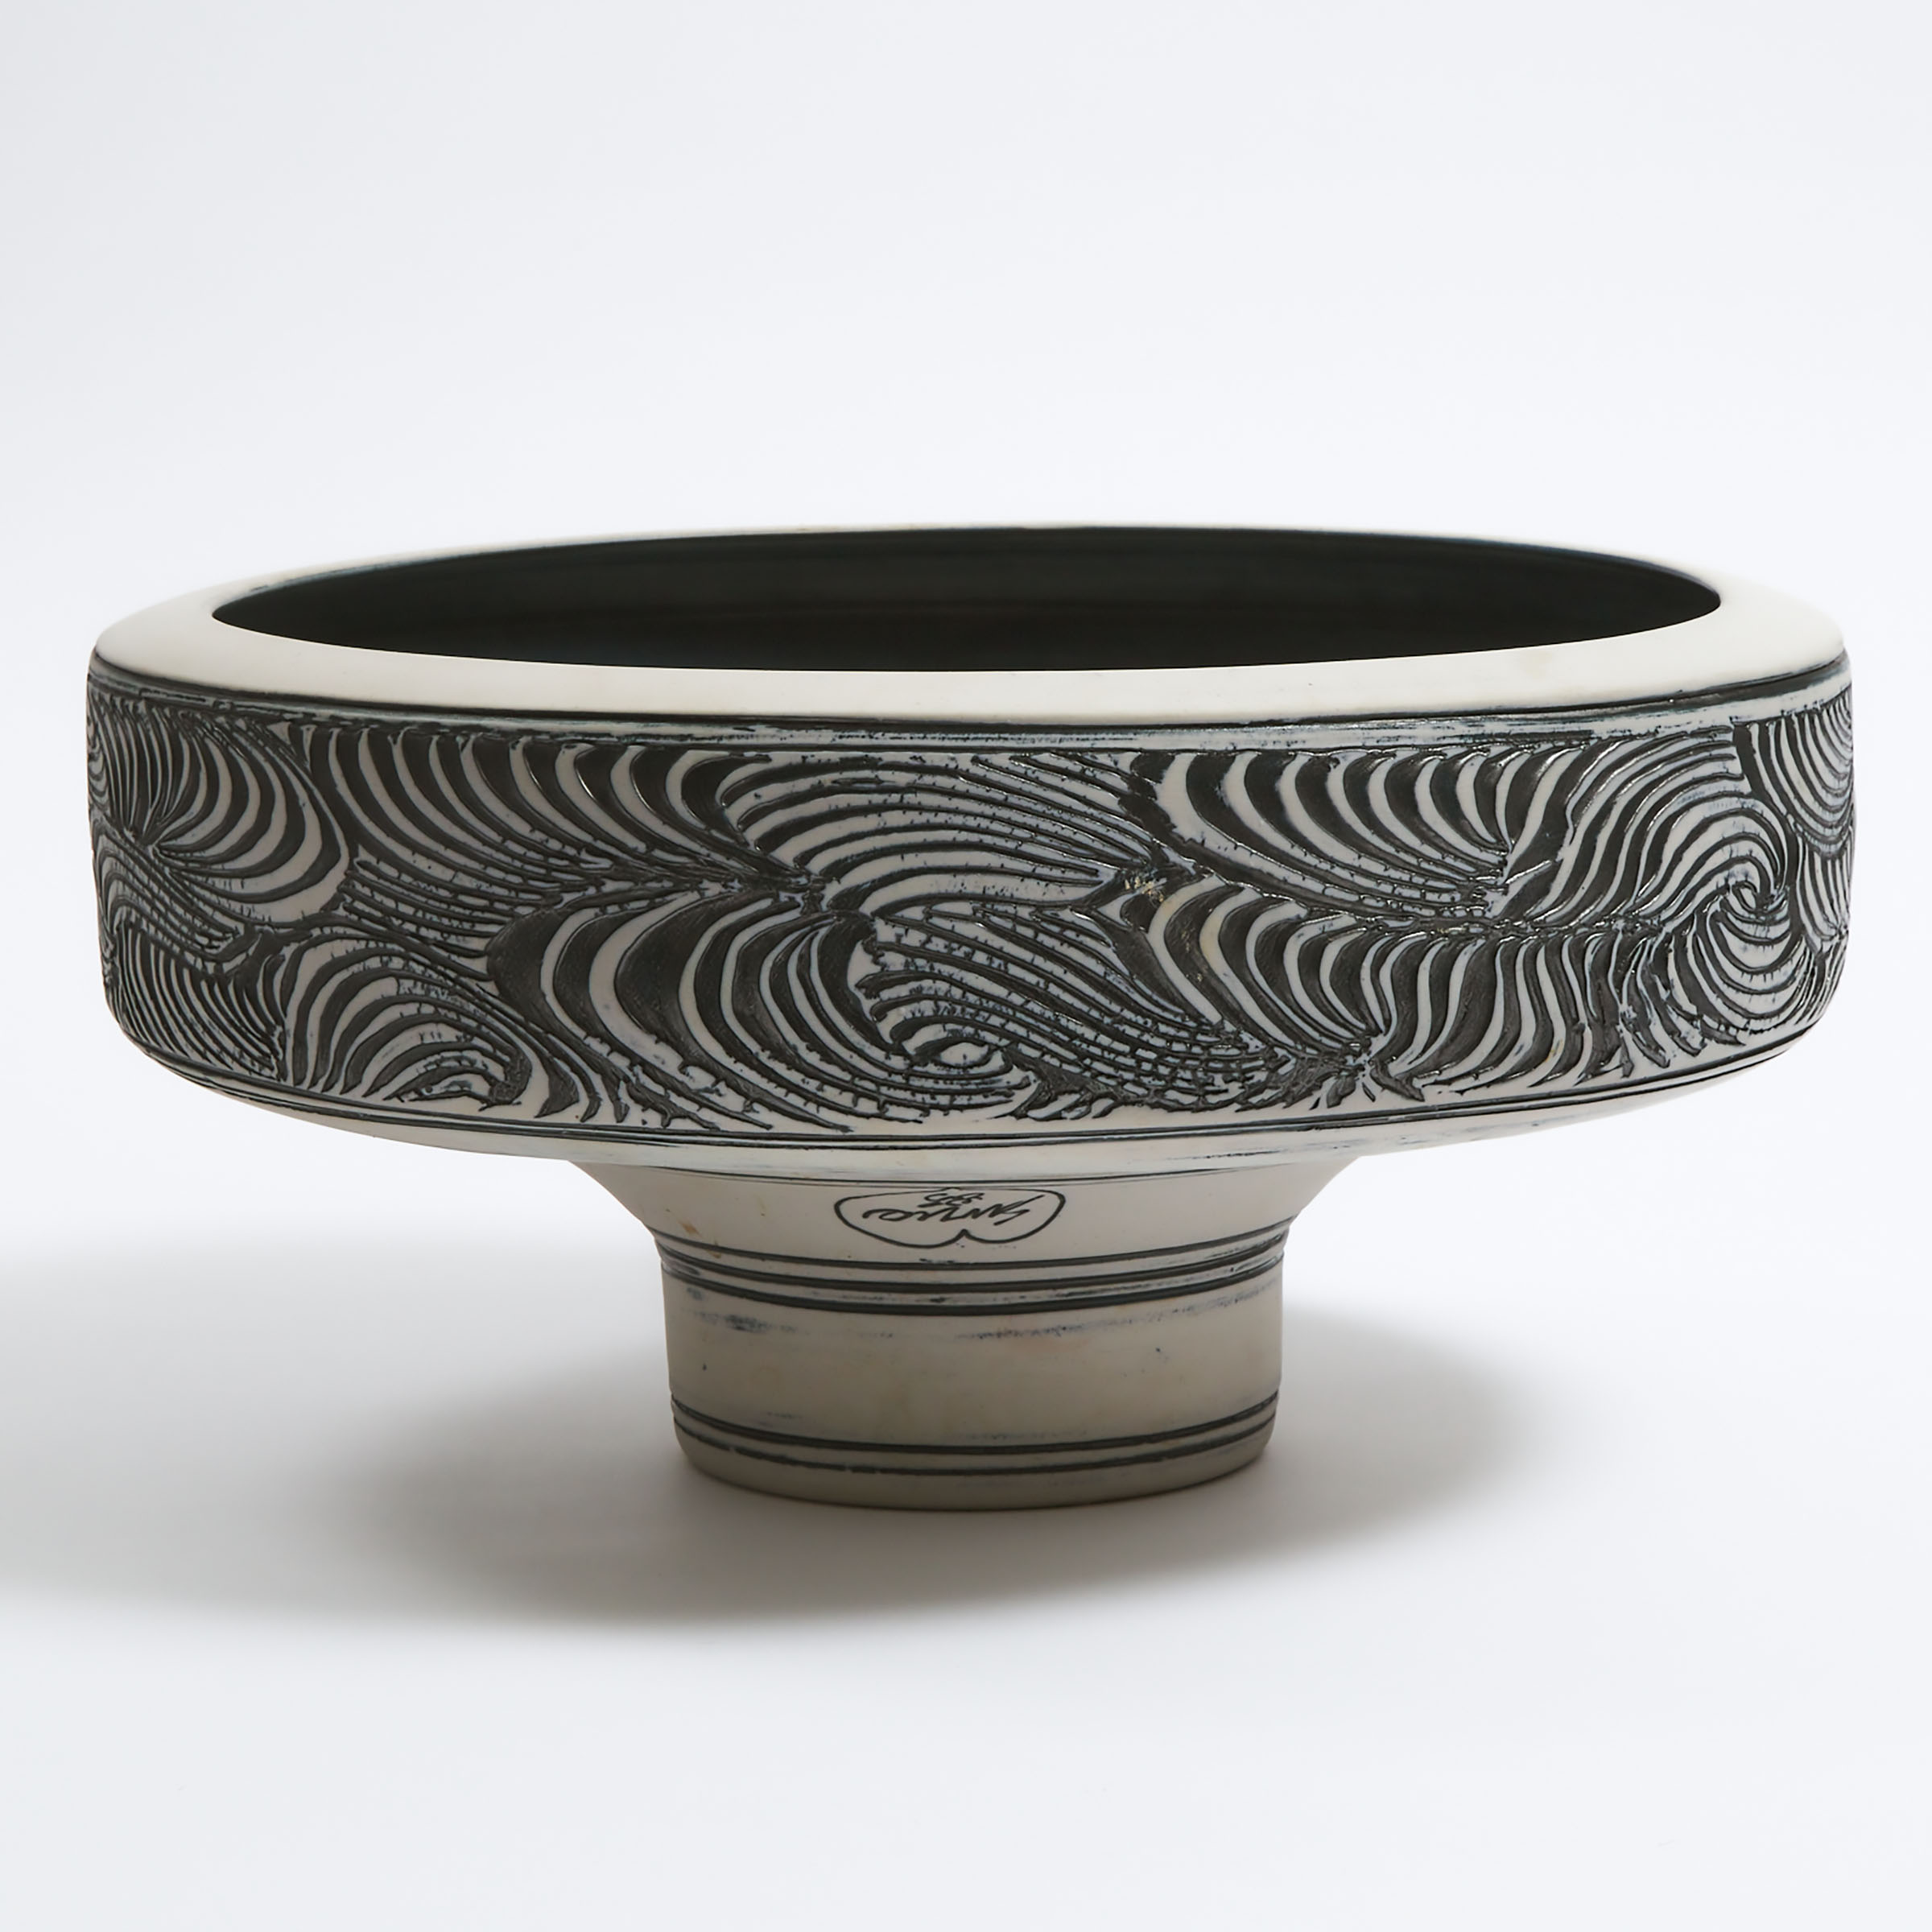 Jack Sures (Canadian, 1934-2018), Stoneware Large Footed Bowl, 1985